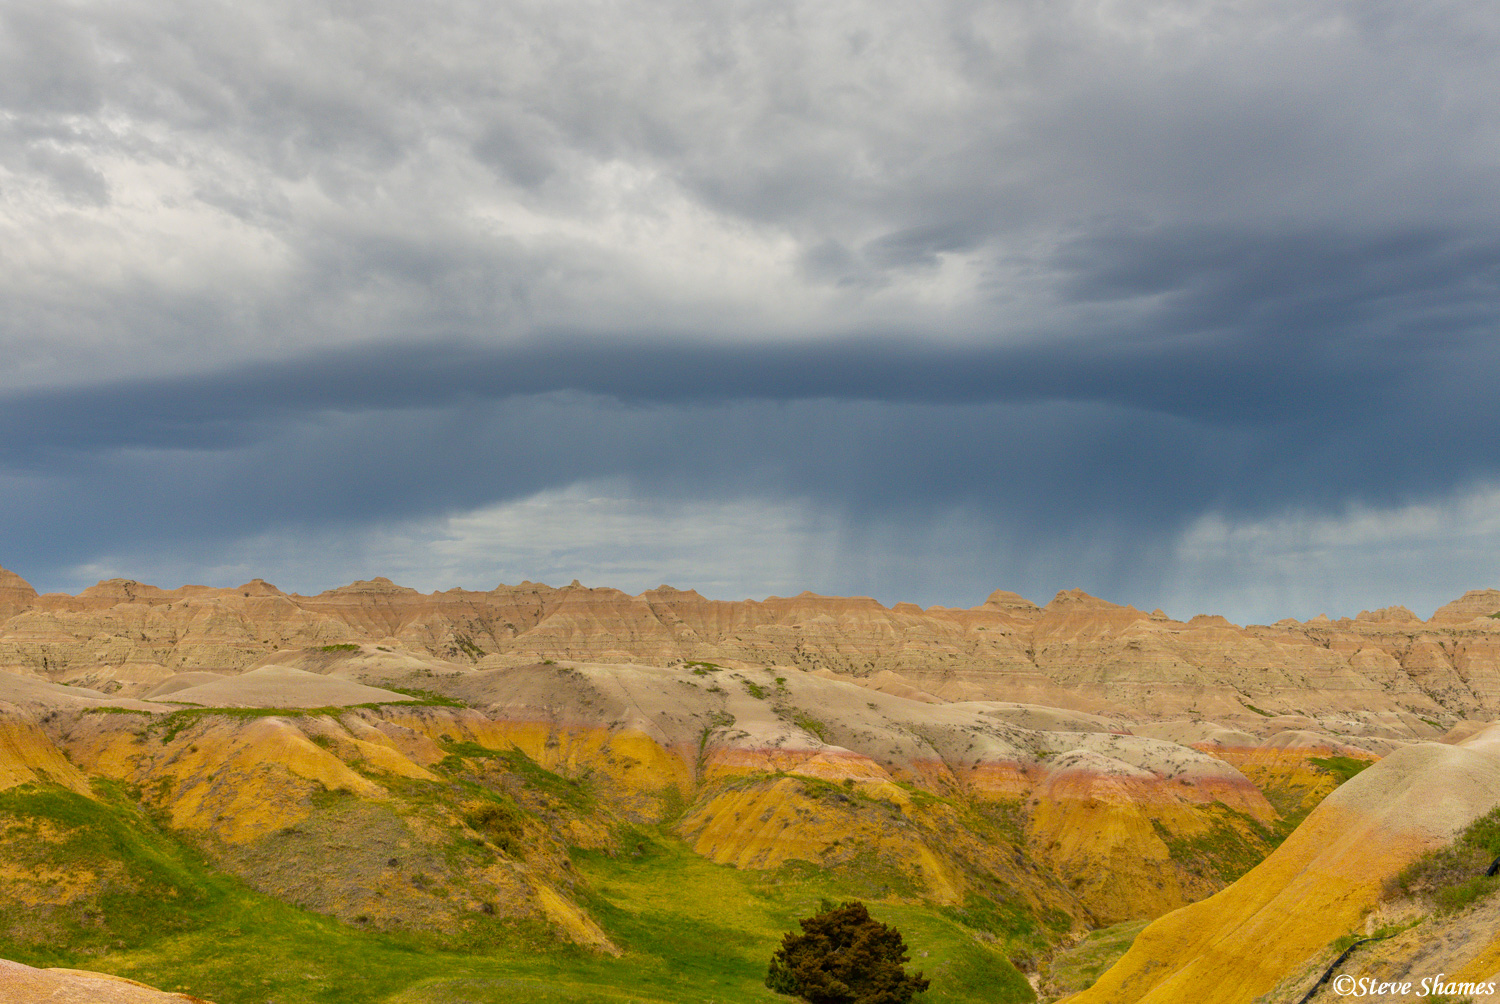 Late in the morning, dramatic storm clouds hovered over the Badlands.